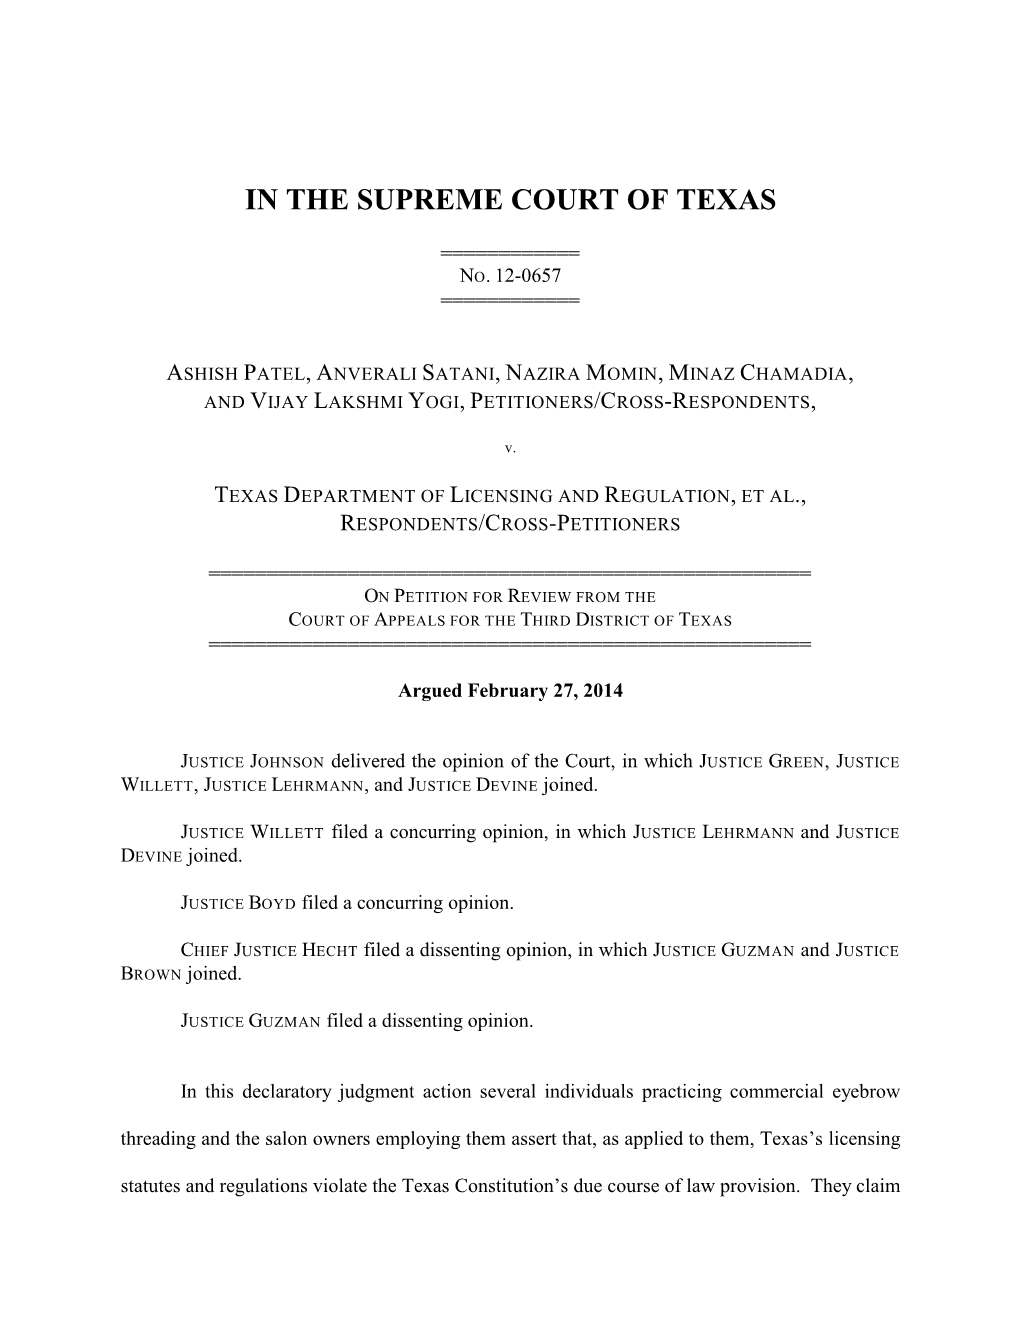 Opinion of the Court, in Which JUSTICE GREEN, JUSTICE WILLETT, JUSTICE LEHRMANN, and JUSTICE DEVINE Joined